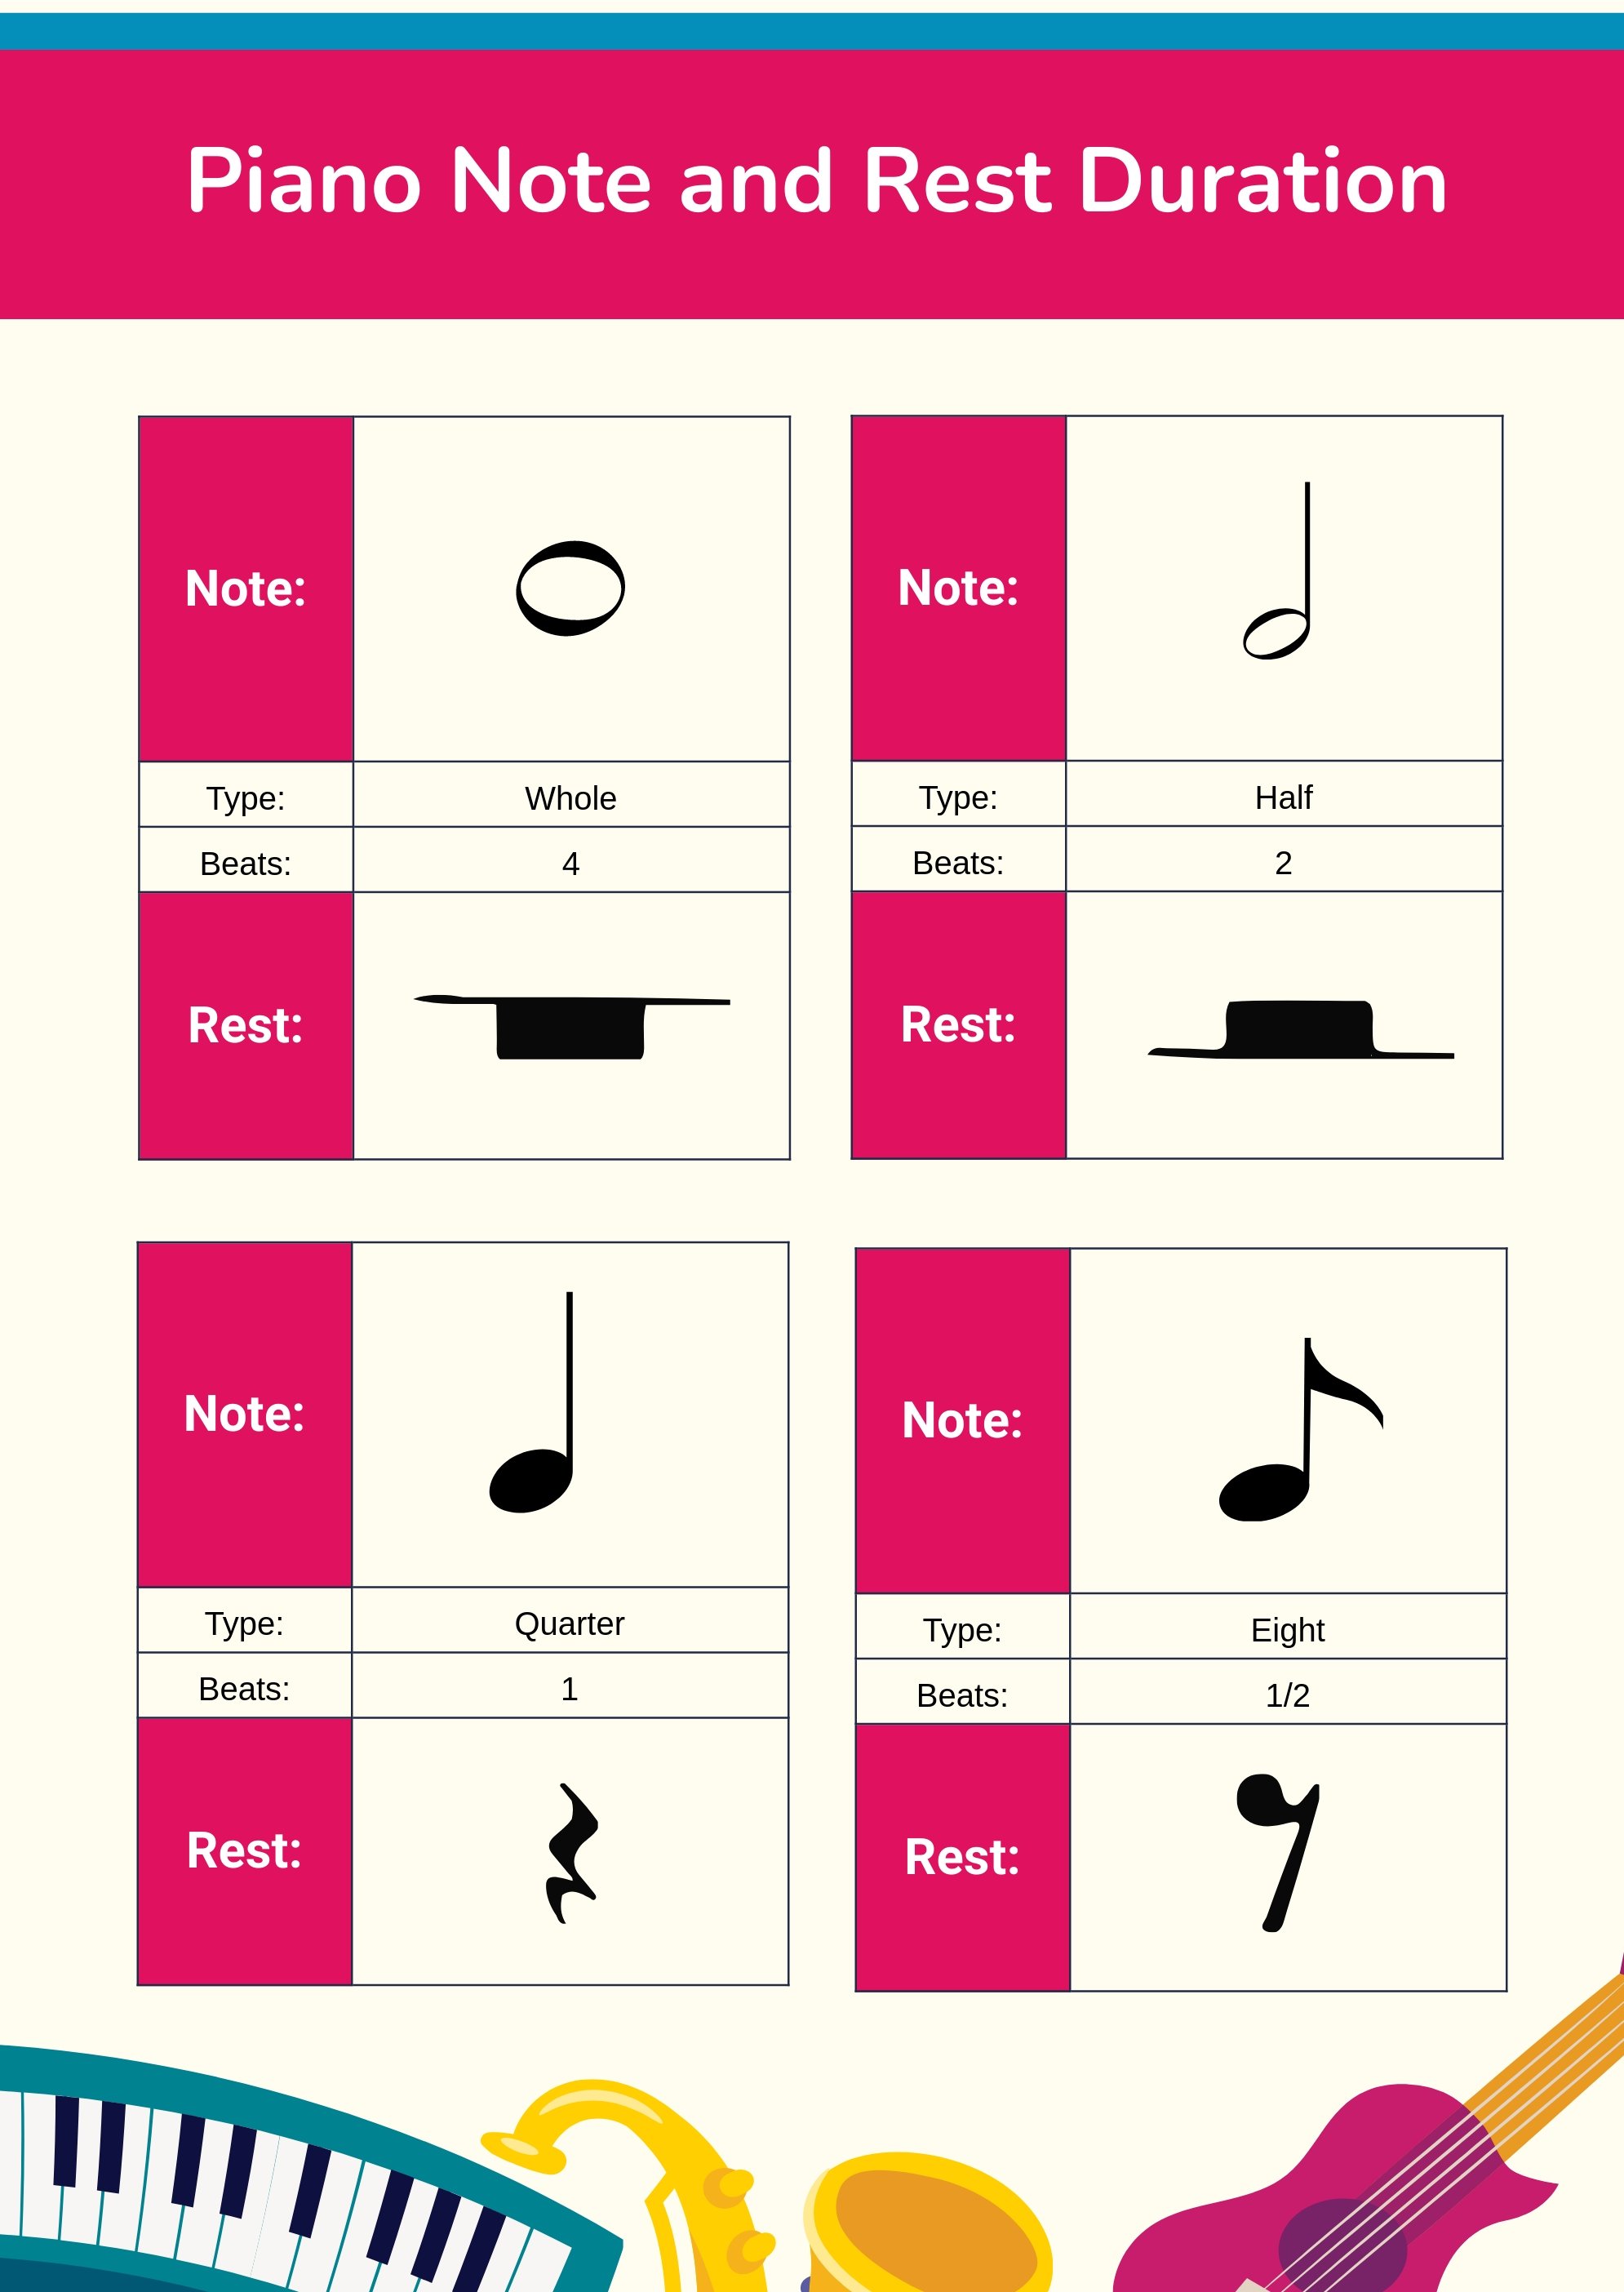 Piano Music Note Duration Chart in PDF, Illustrator